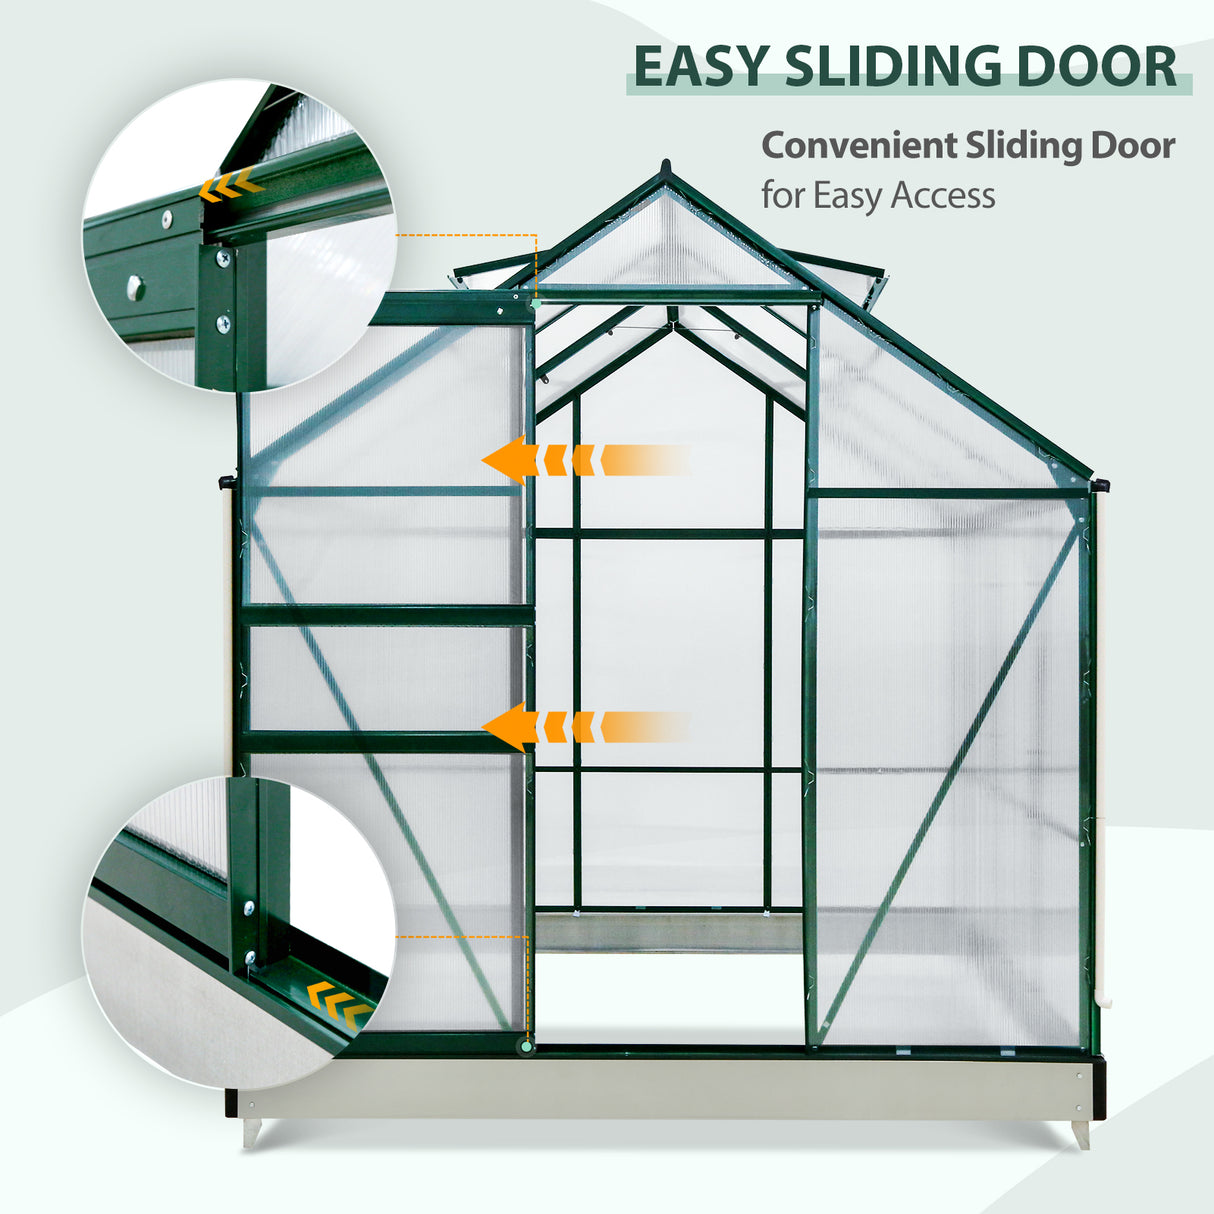 EAGLE PEAK 6x6x7 Polycarbonate and Aluminum Walk-in Hobby Greenhouse with Adjustable Roof Vent